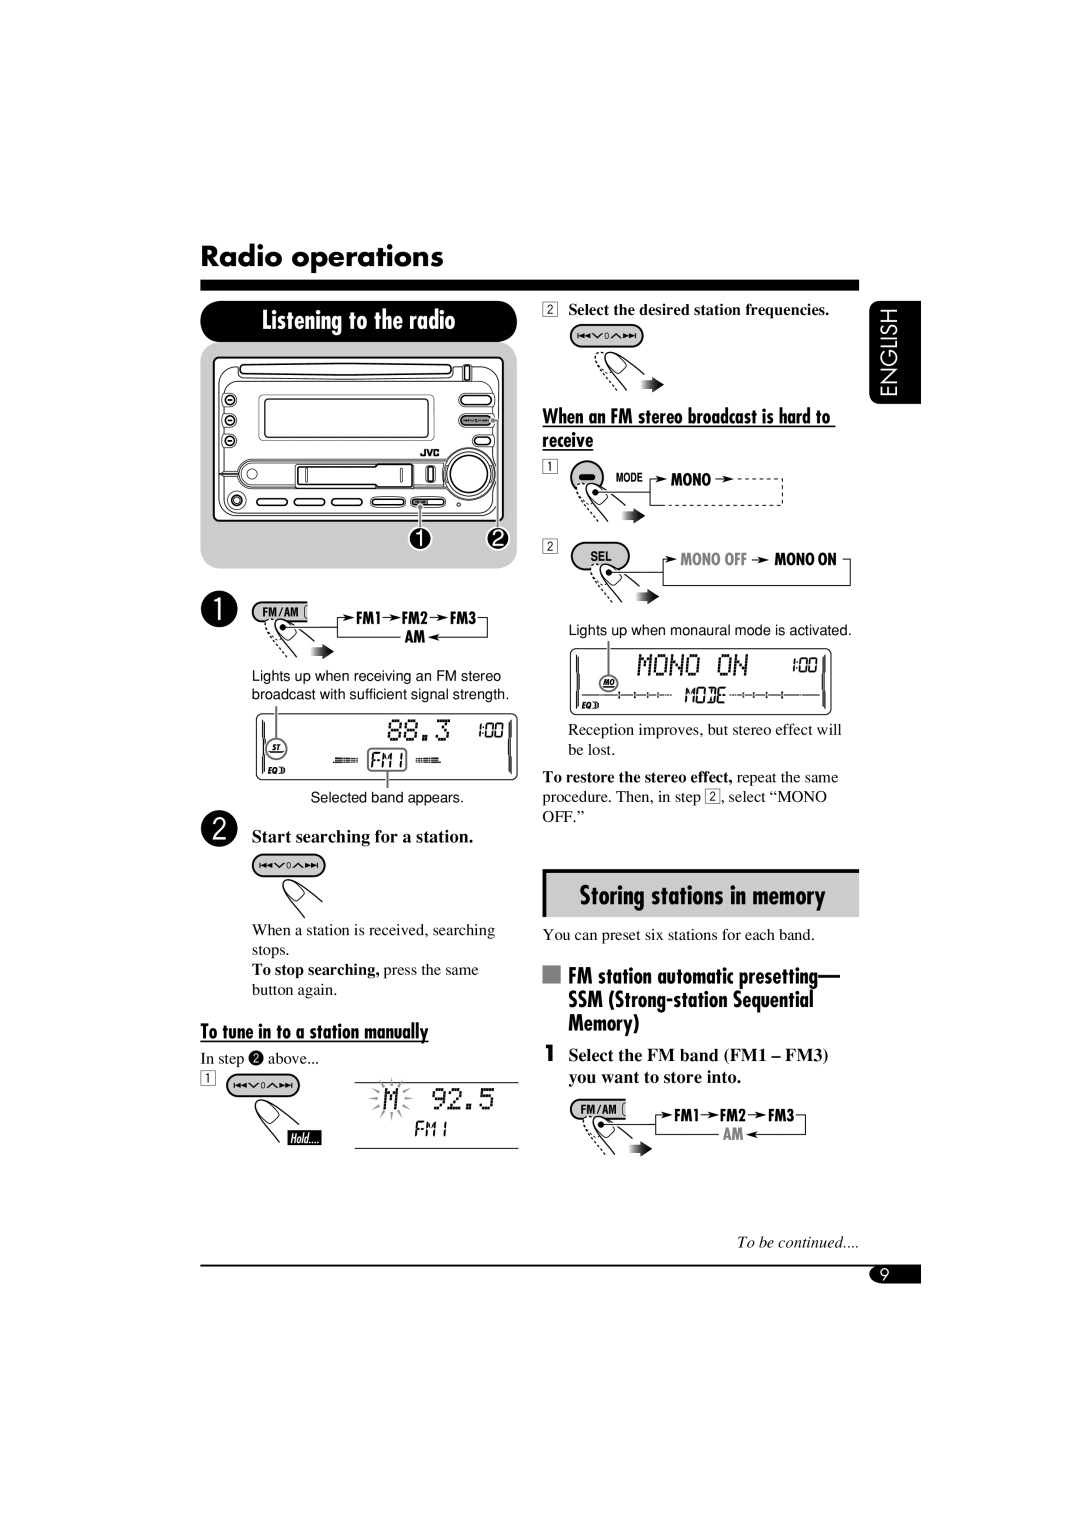 JVC W-XC406 Radio operations, Listening to the radio, Storing stations in memory, FM station automatic presetting, English 